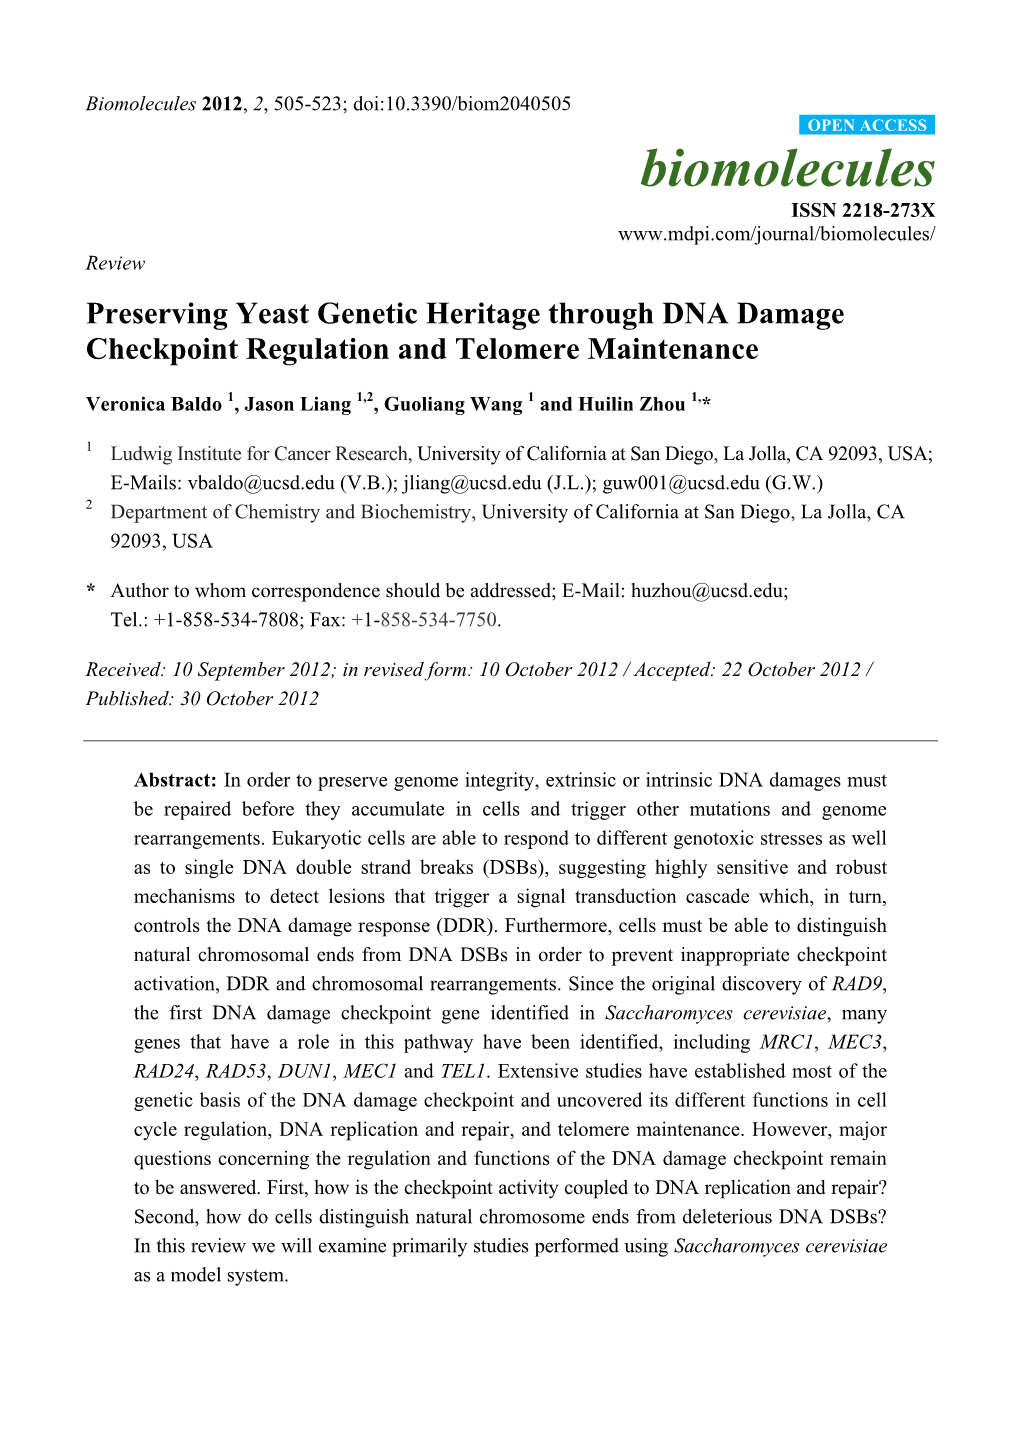 Preserving Yeast Genetic Heritage Through DNA Damage Checkpoint Regulation and Telomere Maintenance